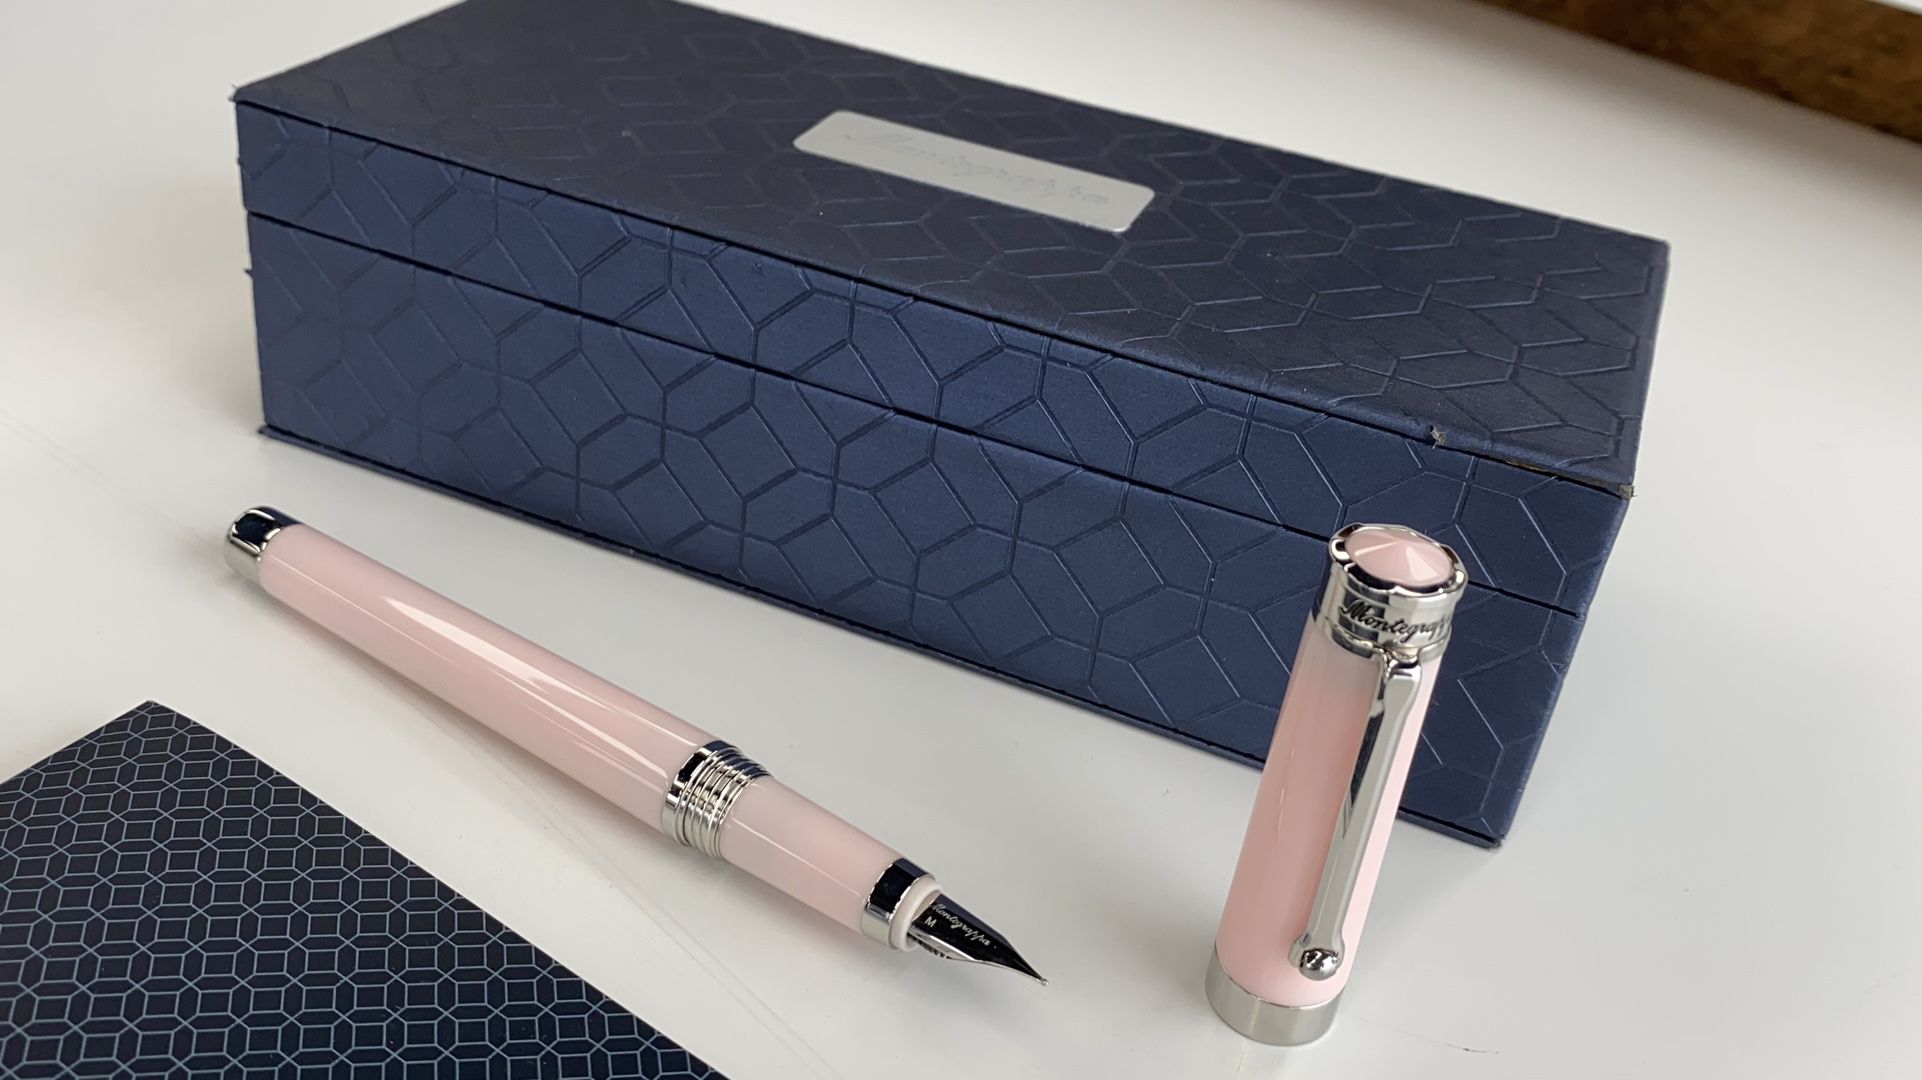 MONTEGRAPPA PAROLA PINK RESIN FOUNTAIN PEN BRAND NEW 100% AUTHENTIC MSRP $375